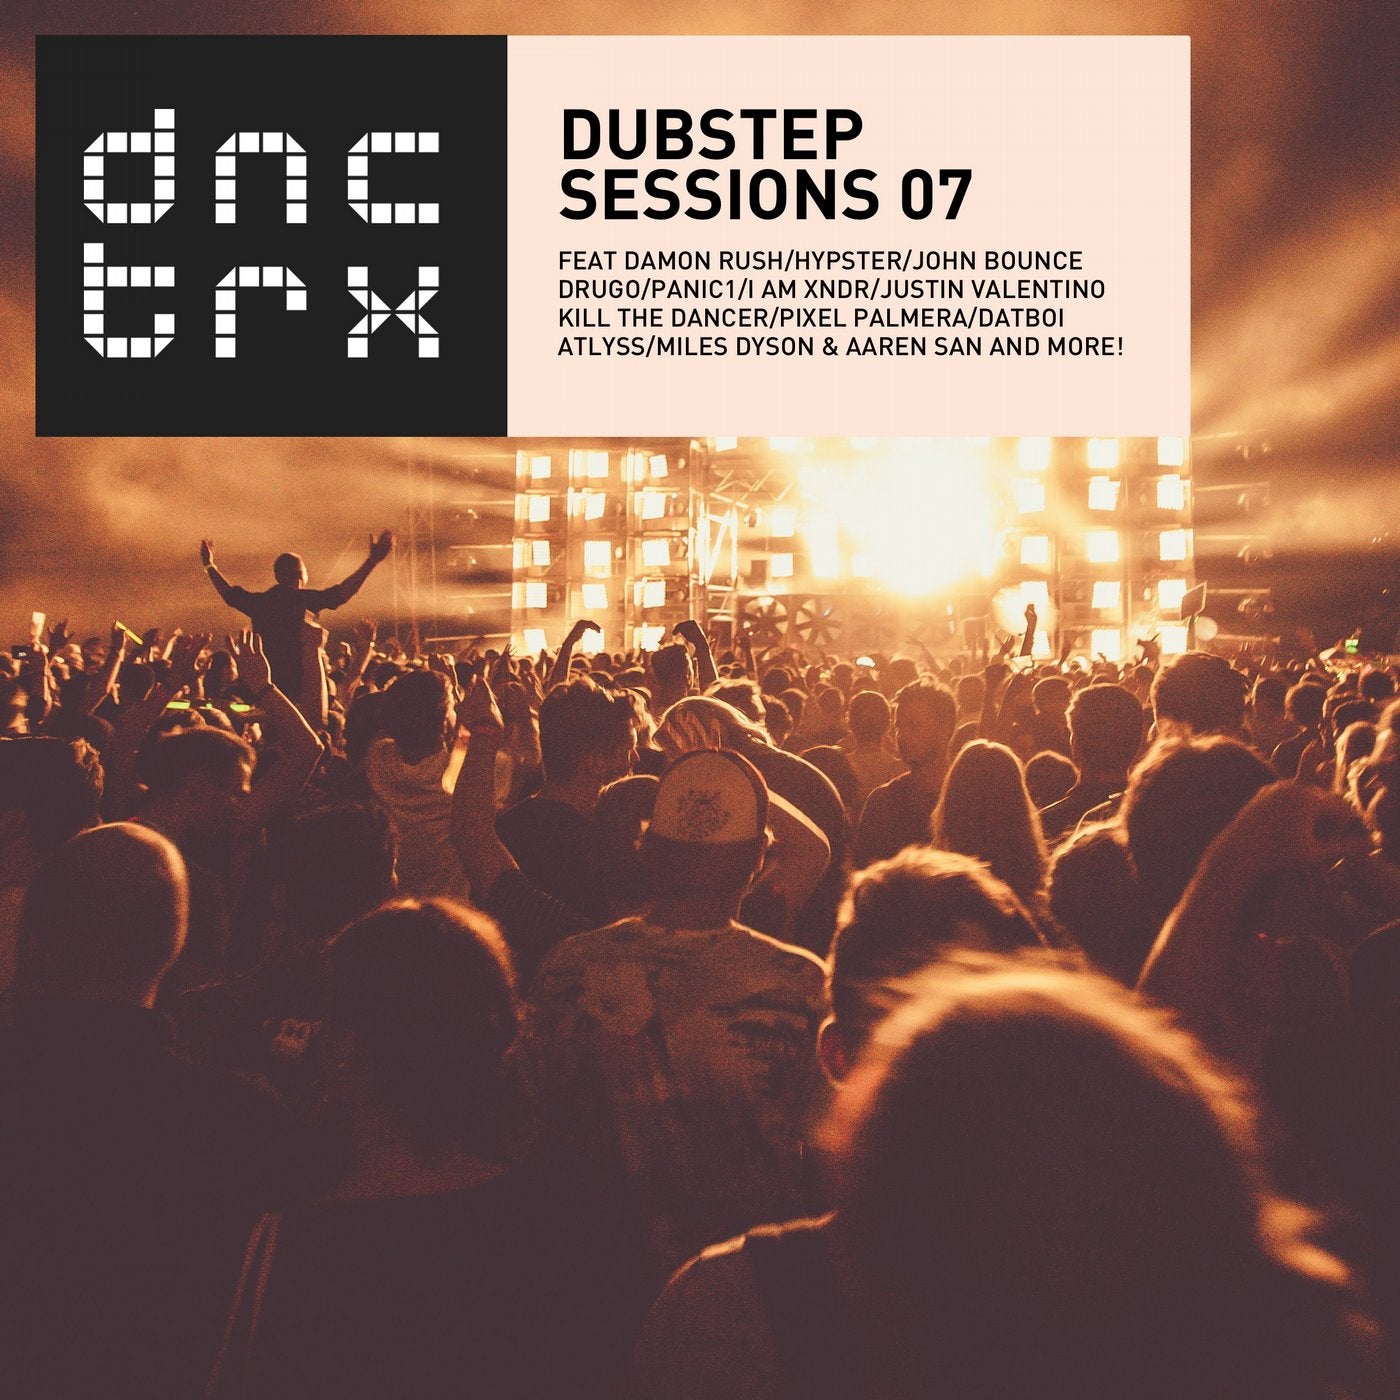 Dubstep Sessions 07